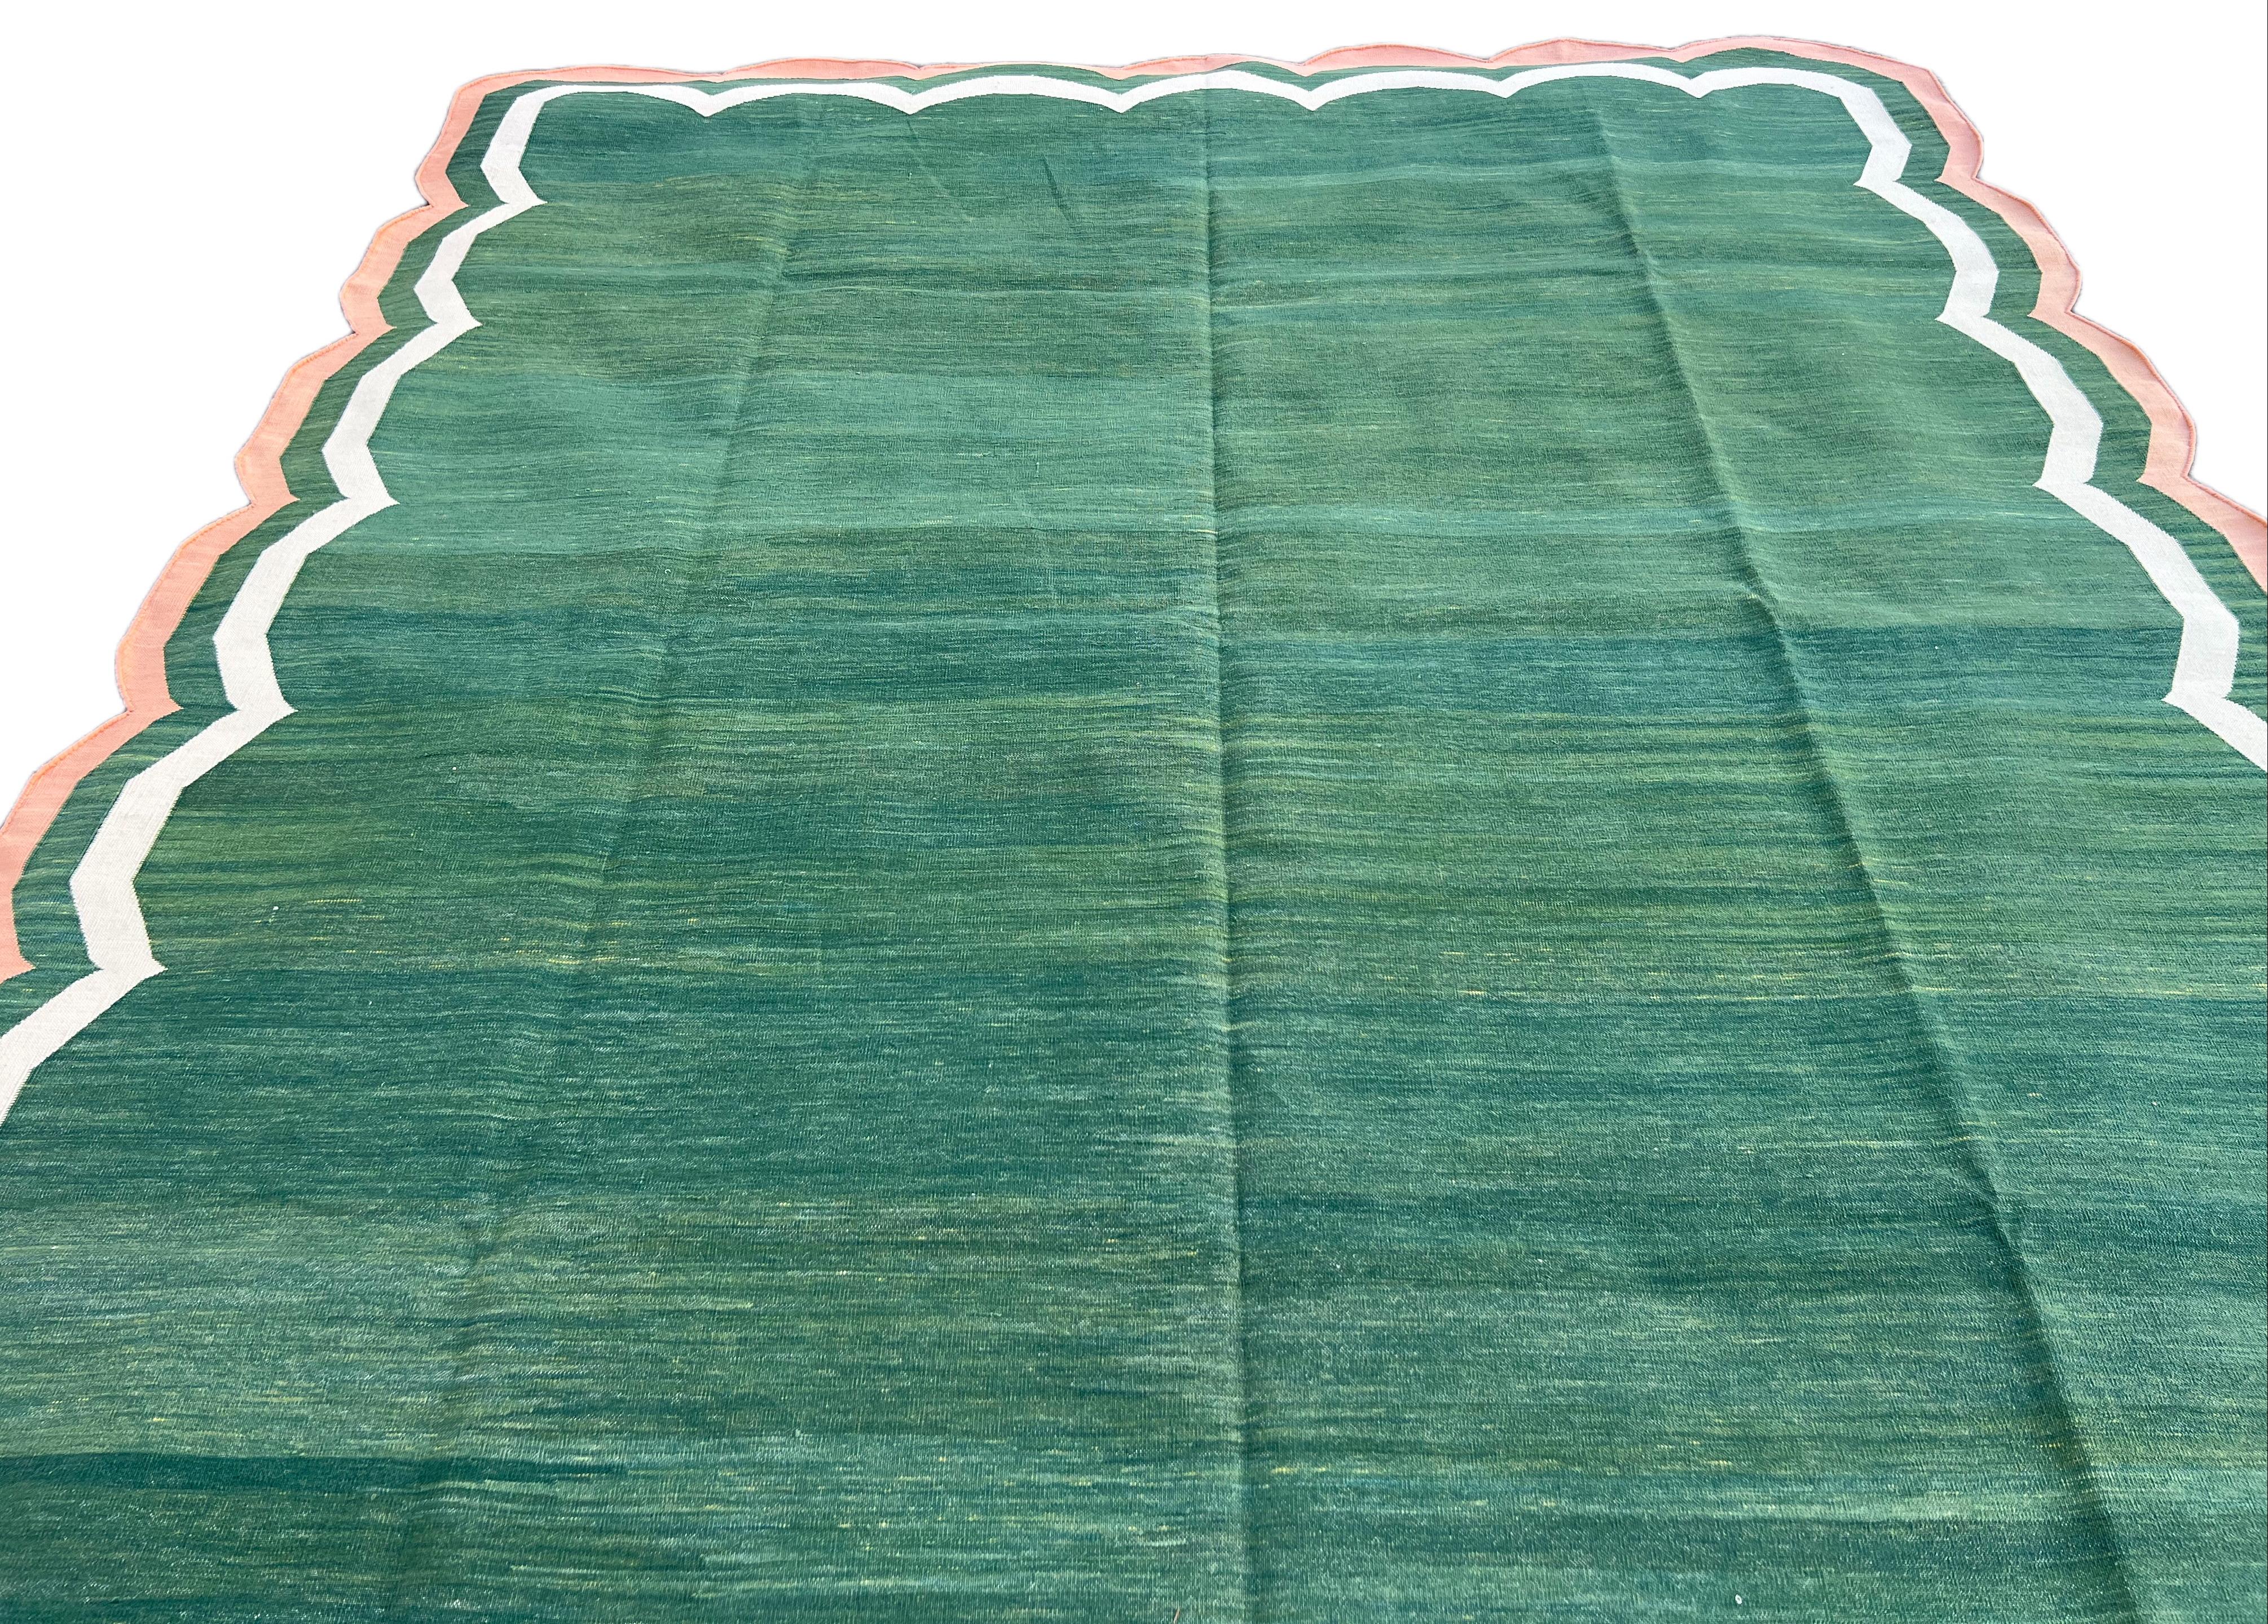 Handmade Cotton Area Flat Weave Rug, 8x10 Green And Coral Scallop Stripe Dhurrie In New Condition For Sale In Jaipur, IN